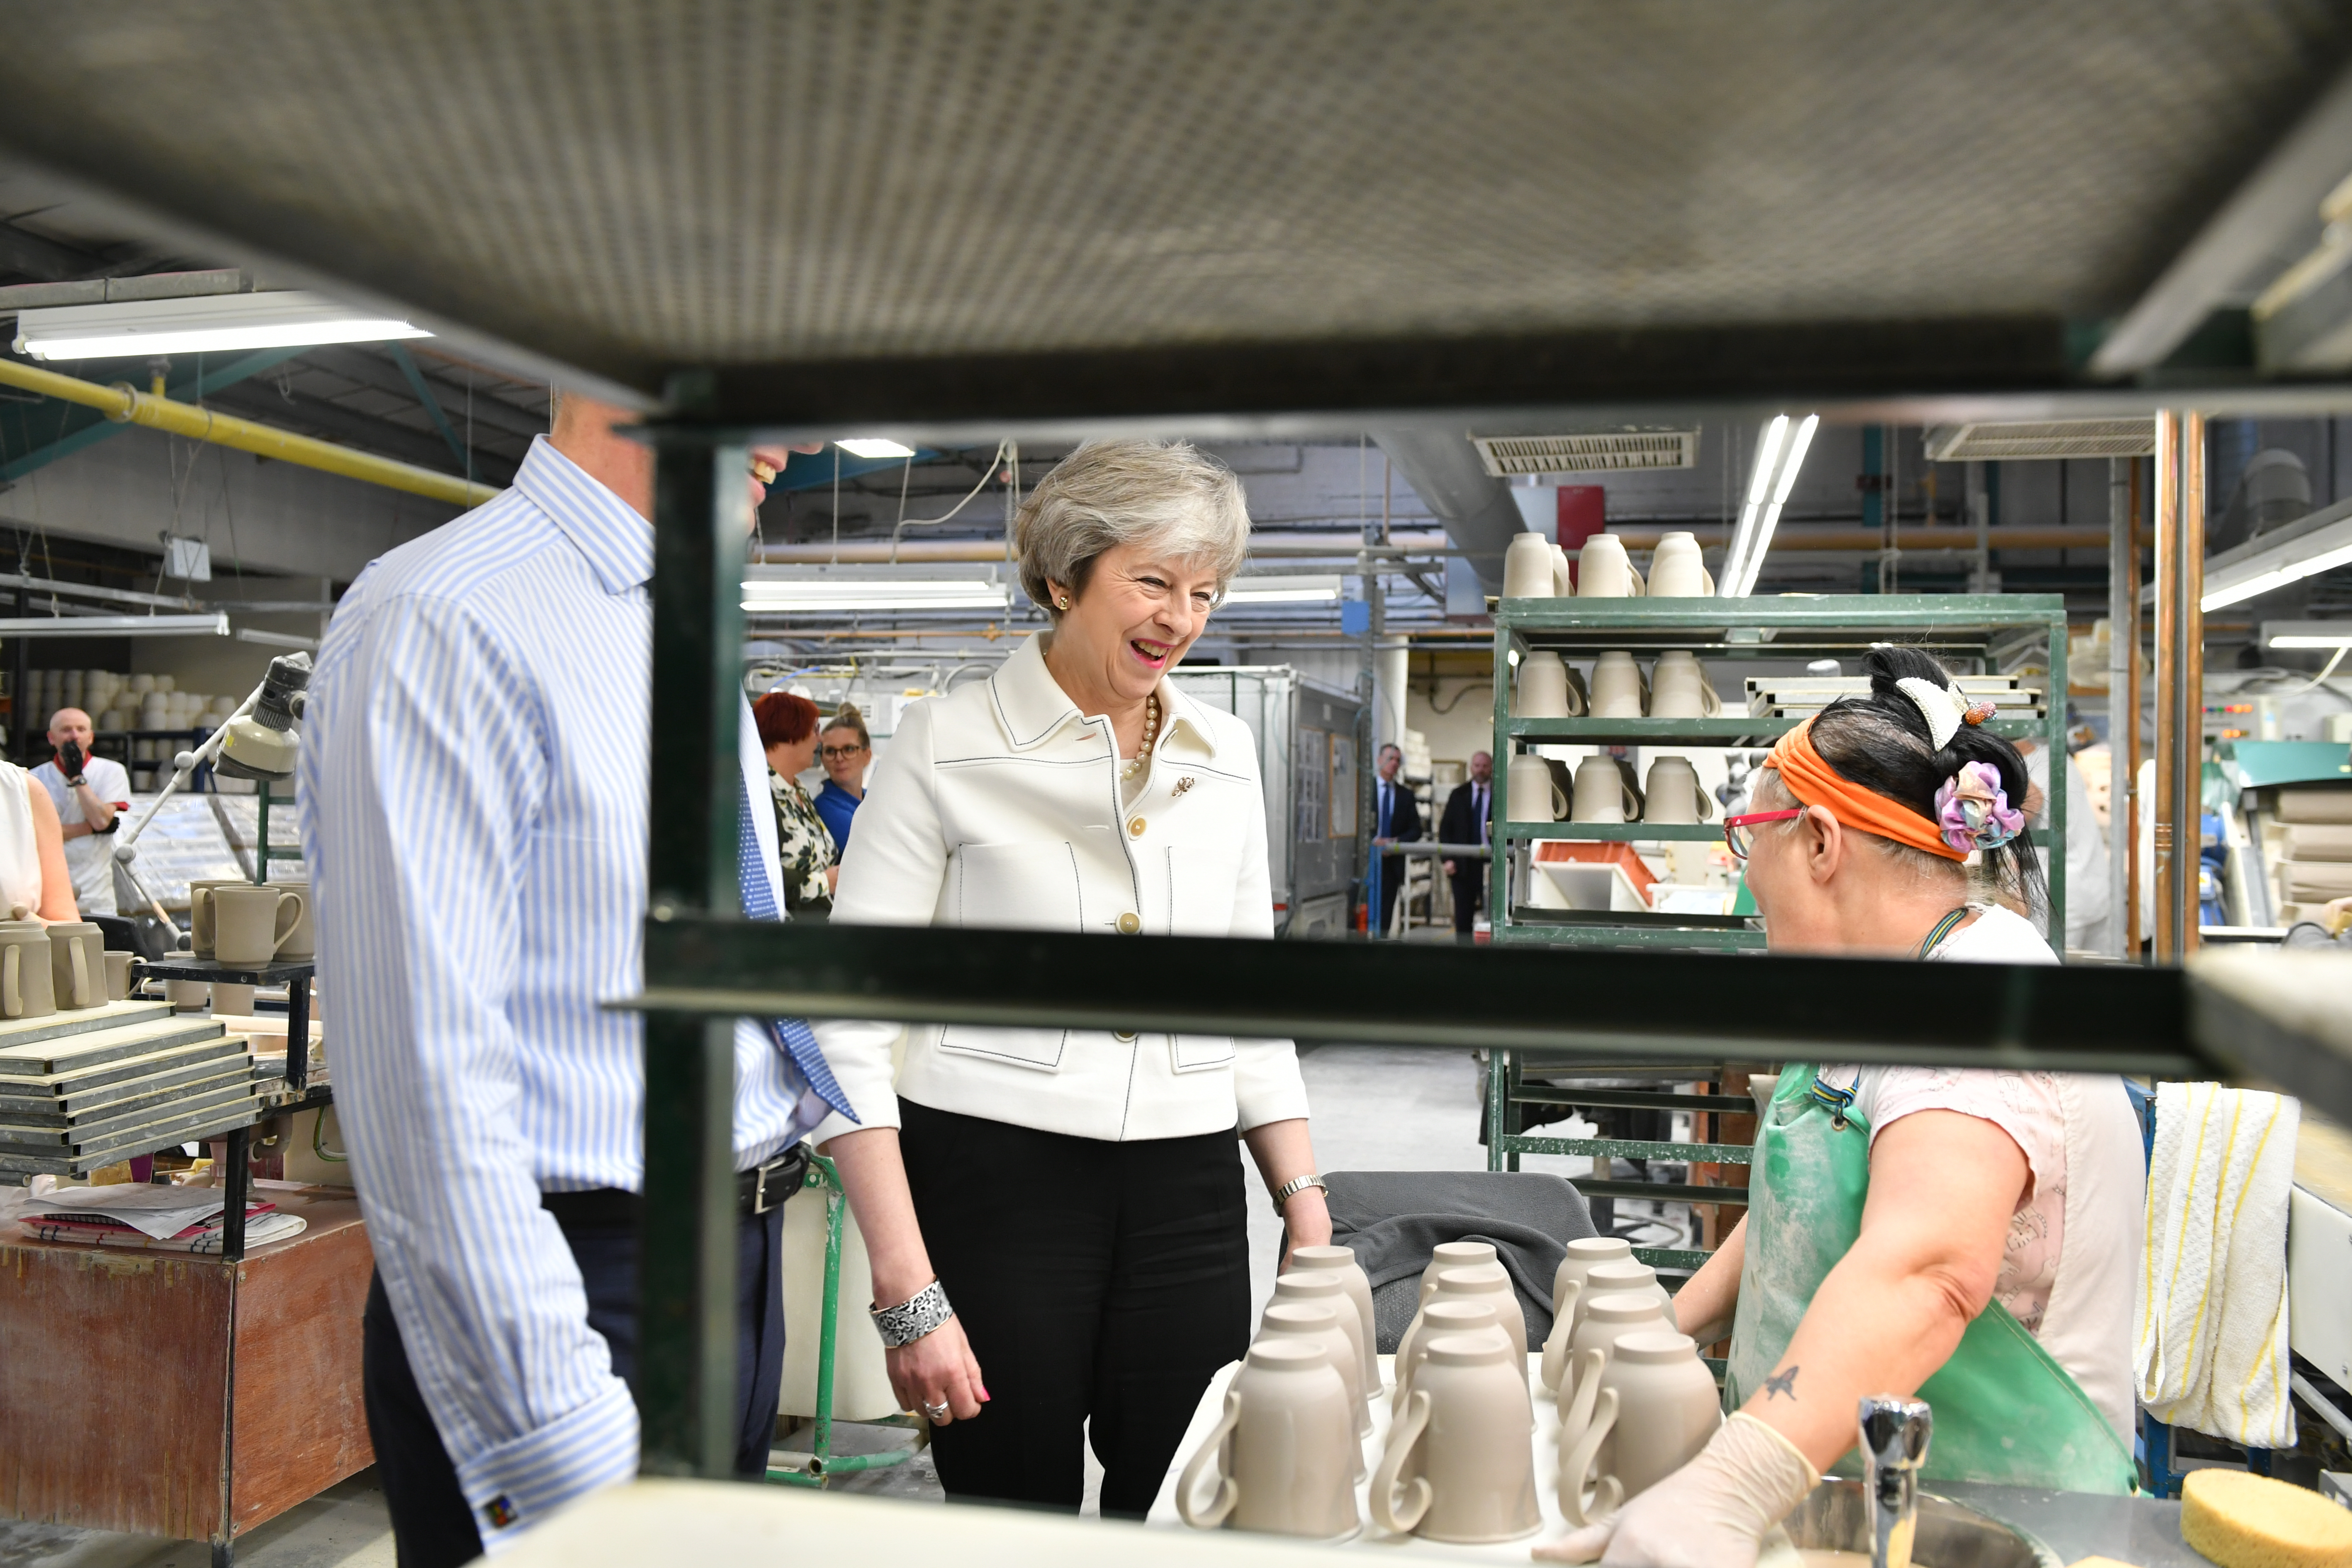 STOKE ON TRENT, ENGLAND - JANUARY 14: British Prime Minister Theresa May with production manager Rob Findler tours the Portmeirion factory on January 14, 2019 in Stoke on Trent, England. On the eve of the critical Commons vote on her plan to leave the EU, Ms May is urging MPs to consider the "consequences" of their actions in effecting the people's faith in Britain's democracy. (Photo by Ben Birchall - WPA Pool/Getty Images)